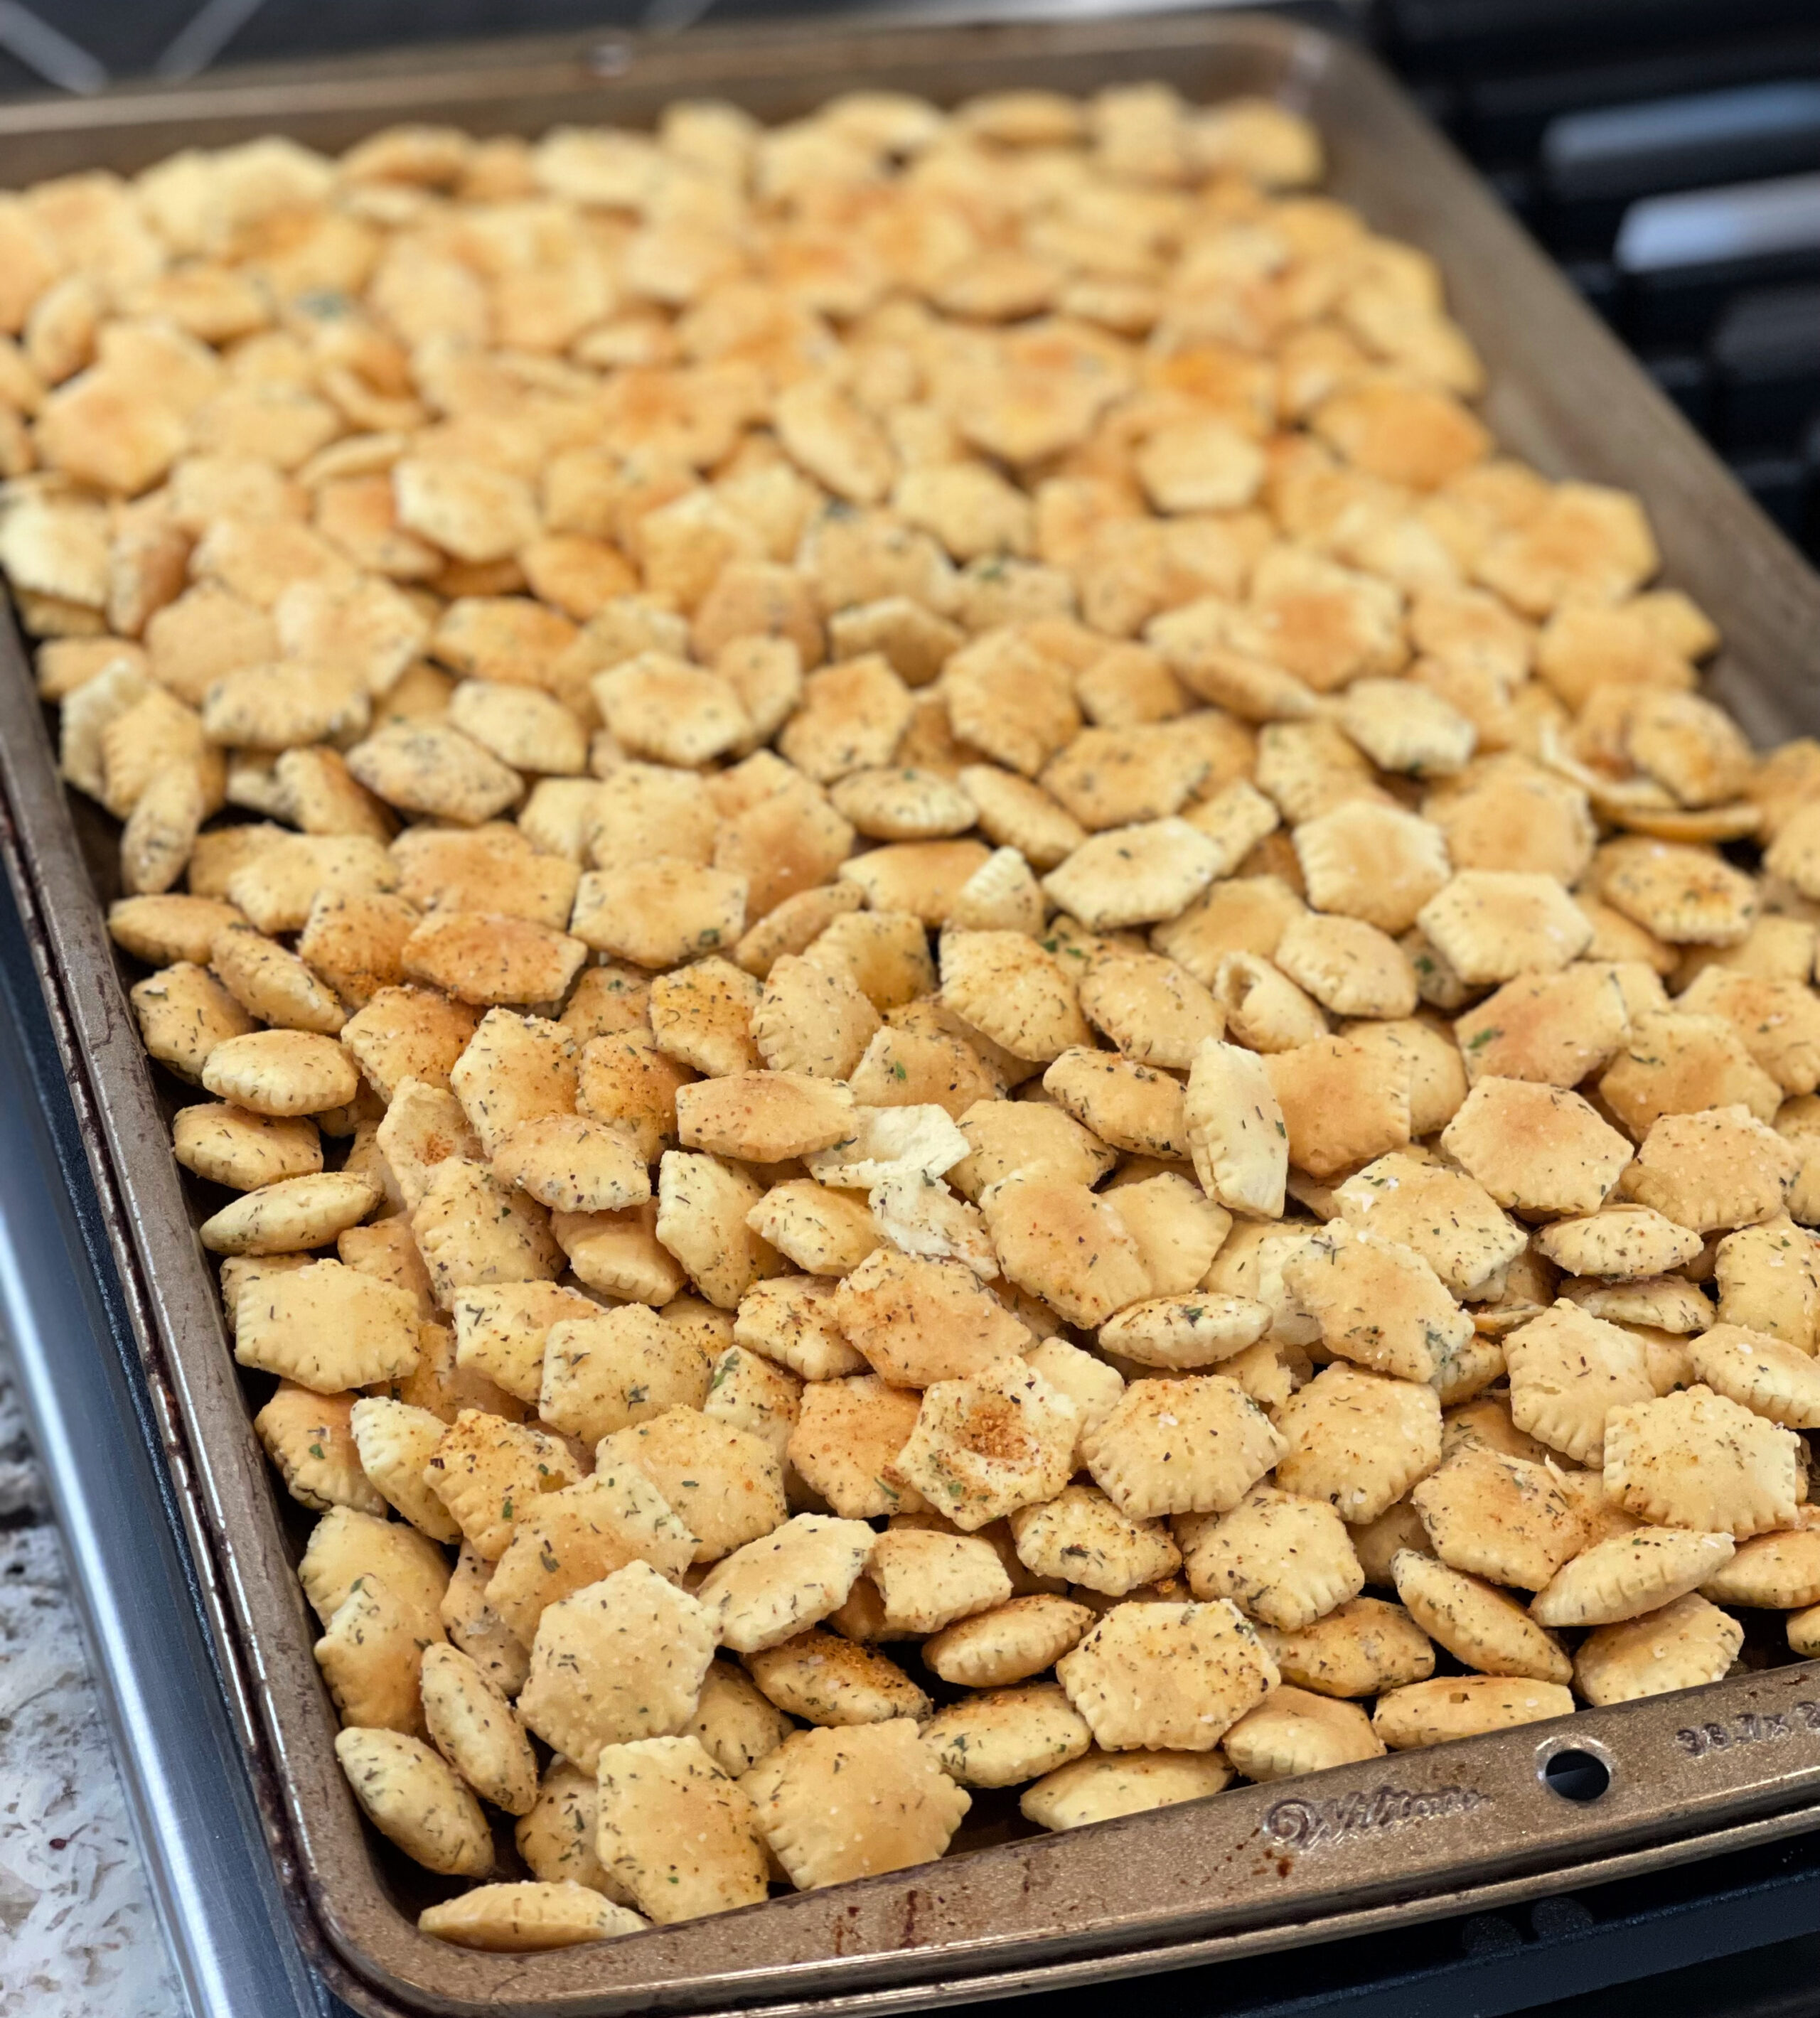 oyster cracker recipe with dill